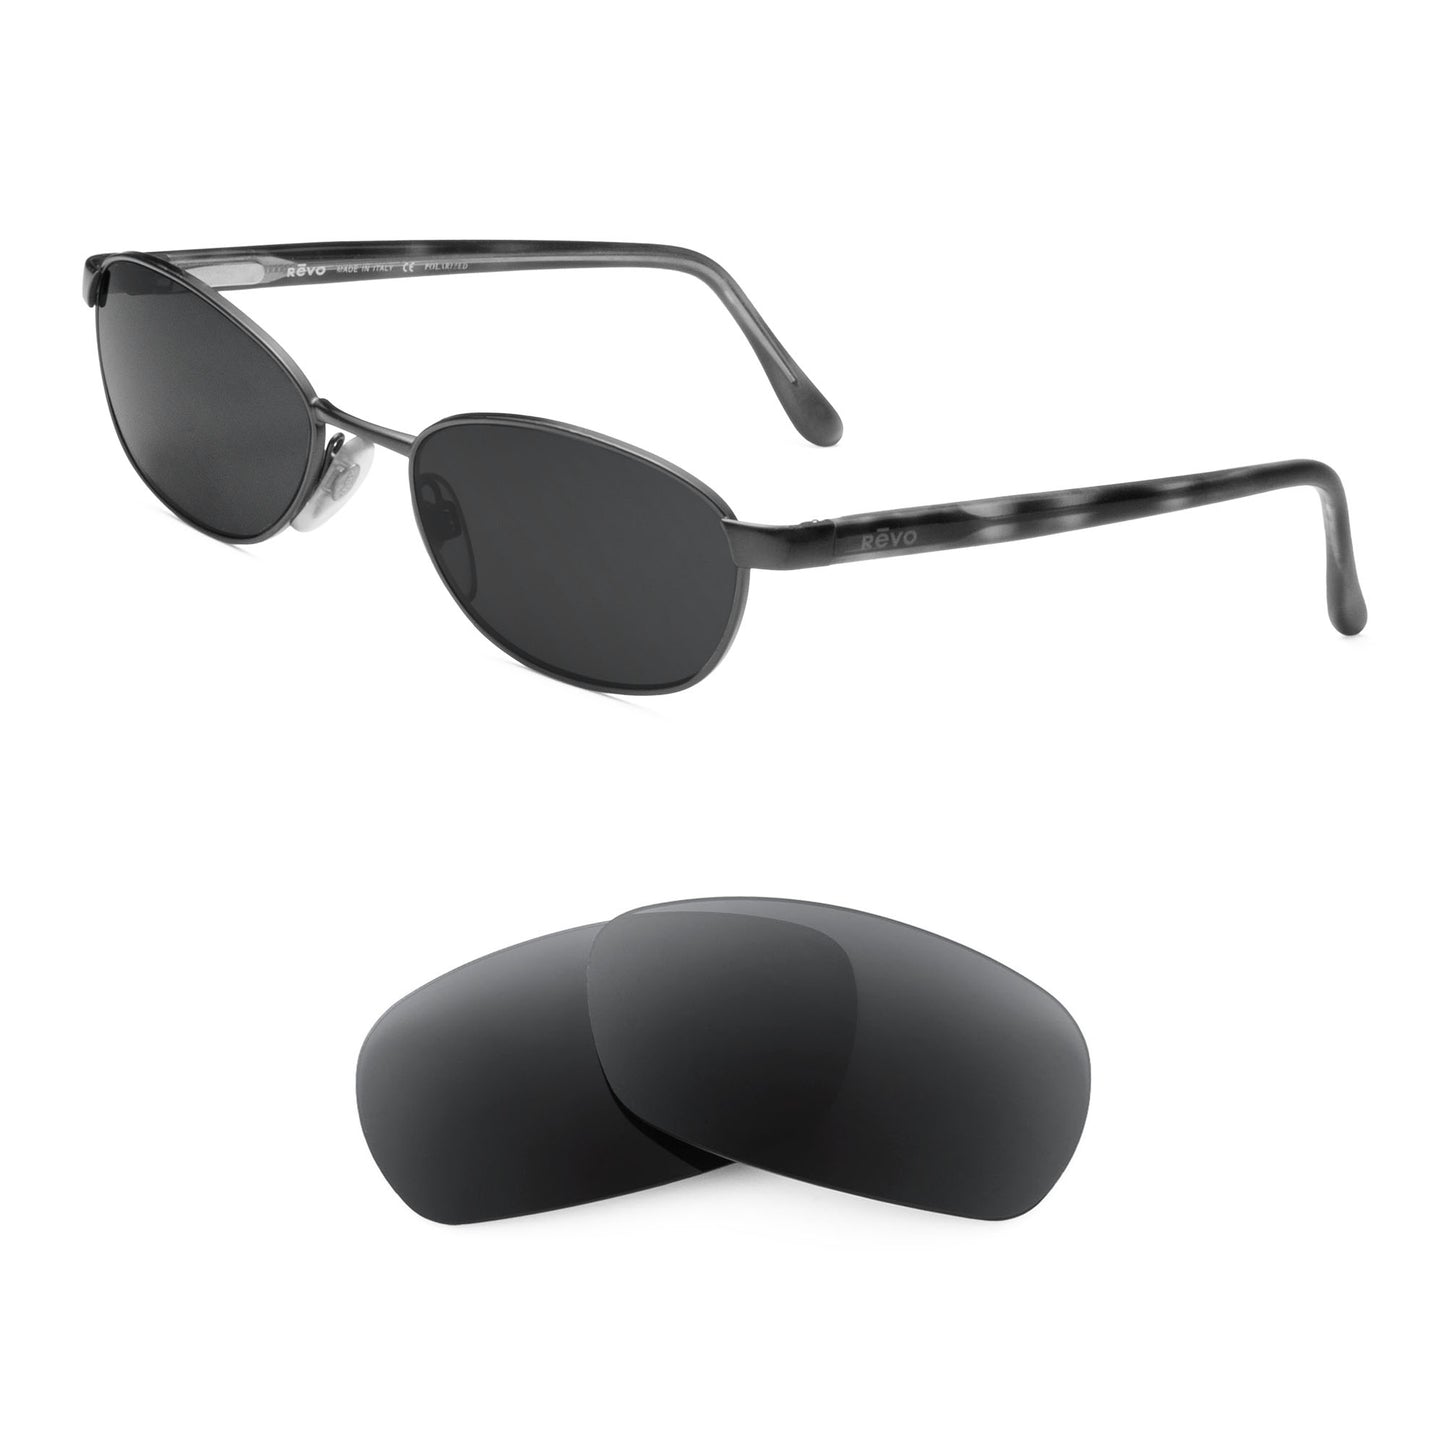 Revo 3009 sunglasses with replacement lenses